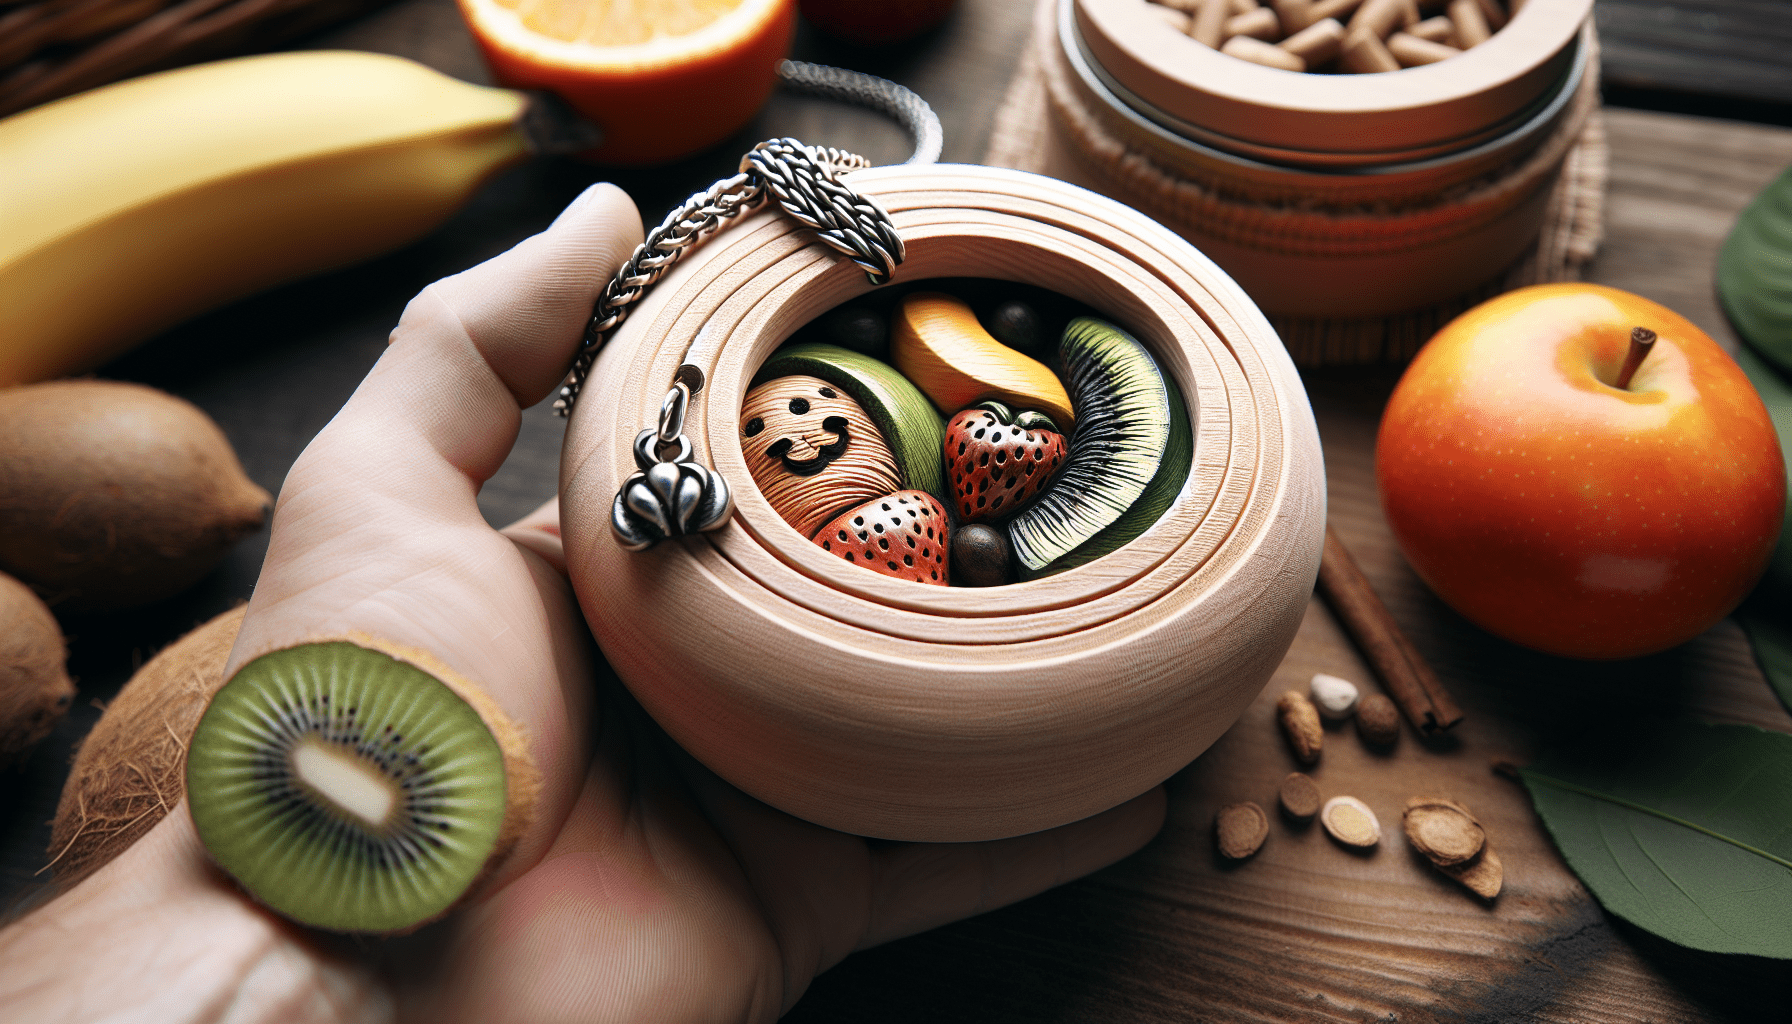 Vegan Food Fruit Pet Urn Necklace for Dogs Cats Ashes Memorial Pendant Keepsake Jewelry for Men Women with Filling Kit